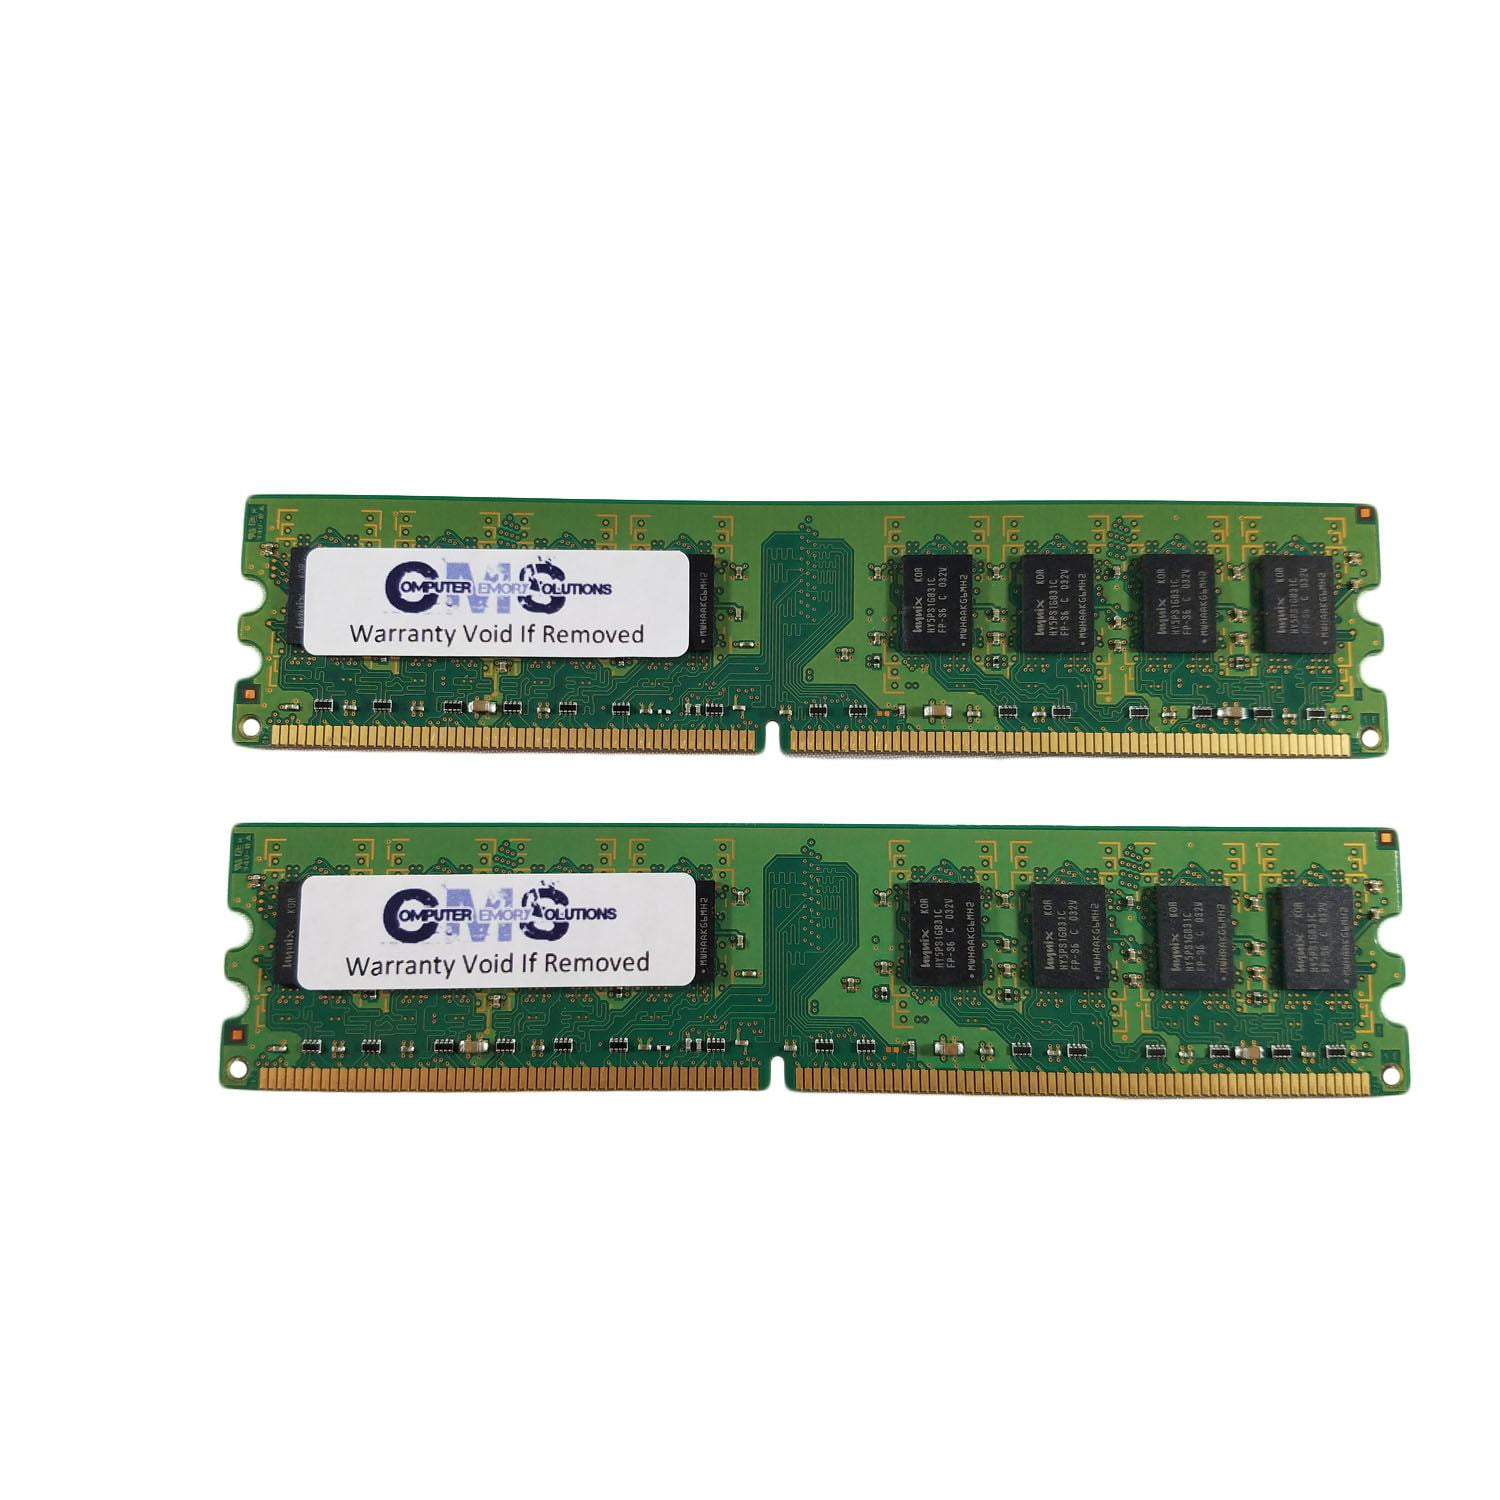 240 pin MemoryMasters 8GB 800MHZ PC2-6400 PC2-6300 8 GB KIT with Crown Series Heatspreaders for Extra Cooling CL 5-5-5-12 2 X 4GB DDR2 DIMM